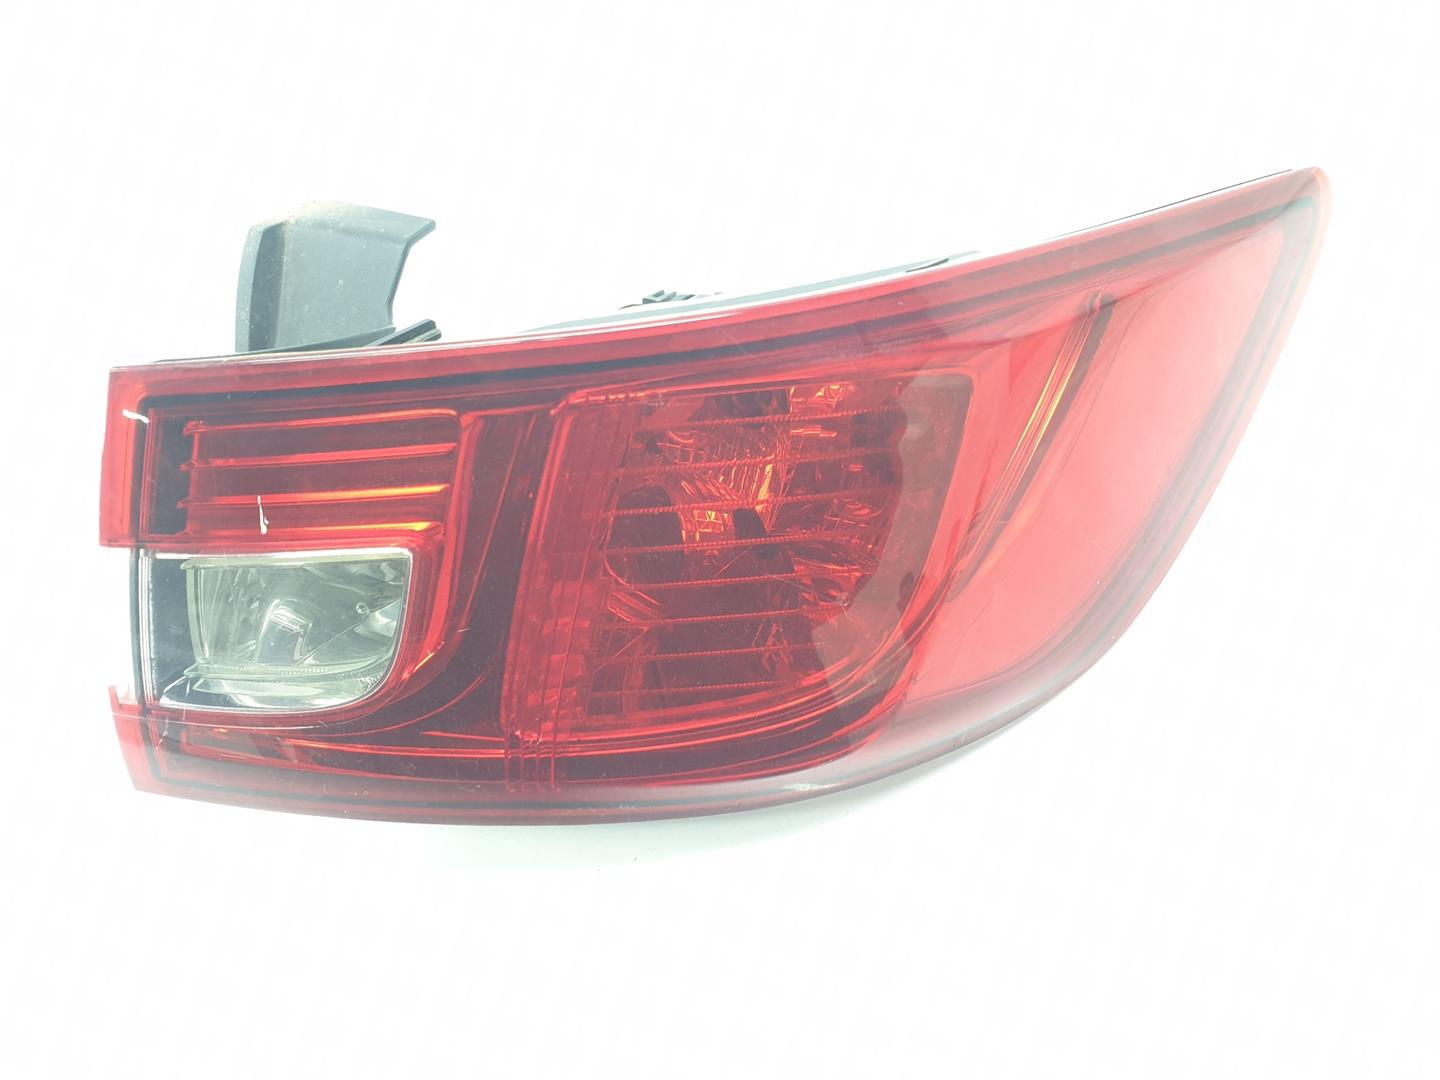 RENAULT Clio 3 generation (2005-2012) Rear Right Taillight Lamp 265502631R, 265502631R 24867481